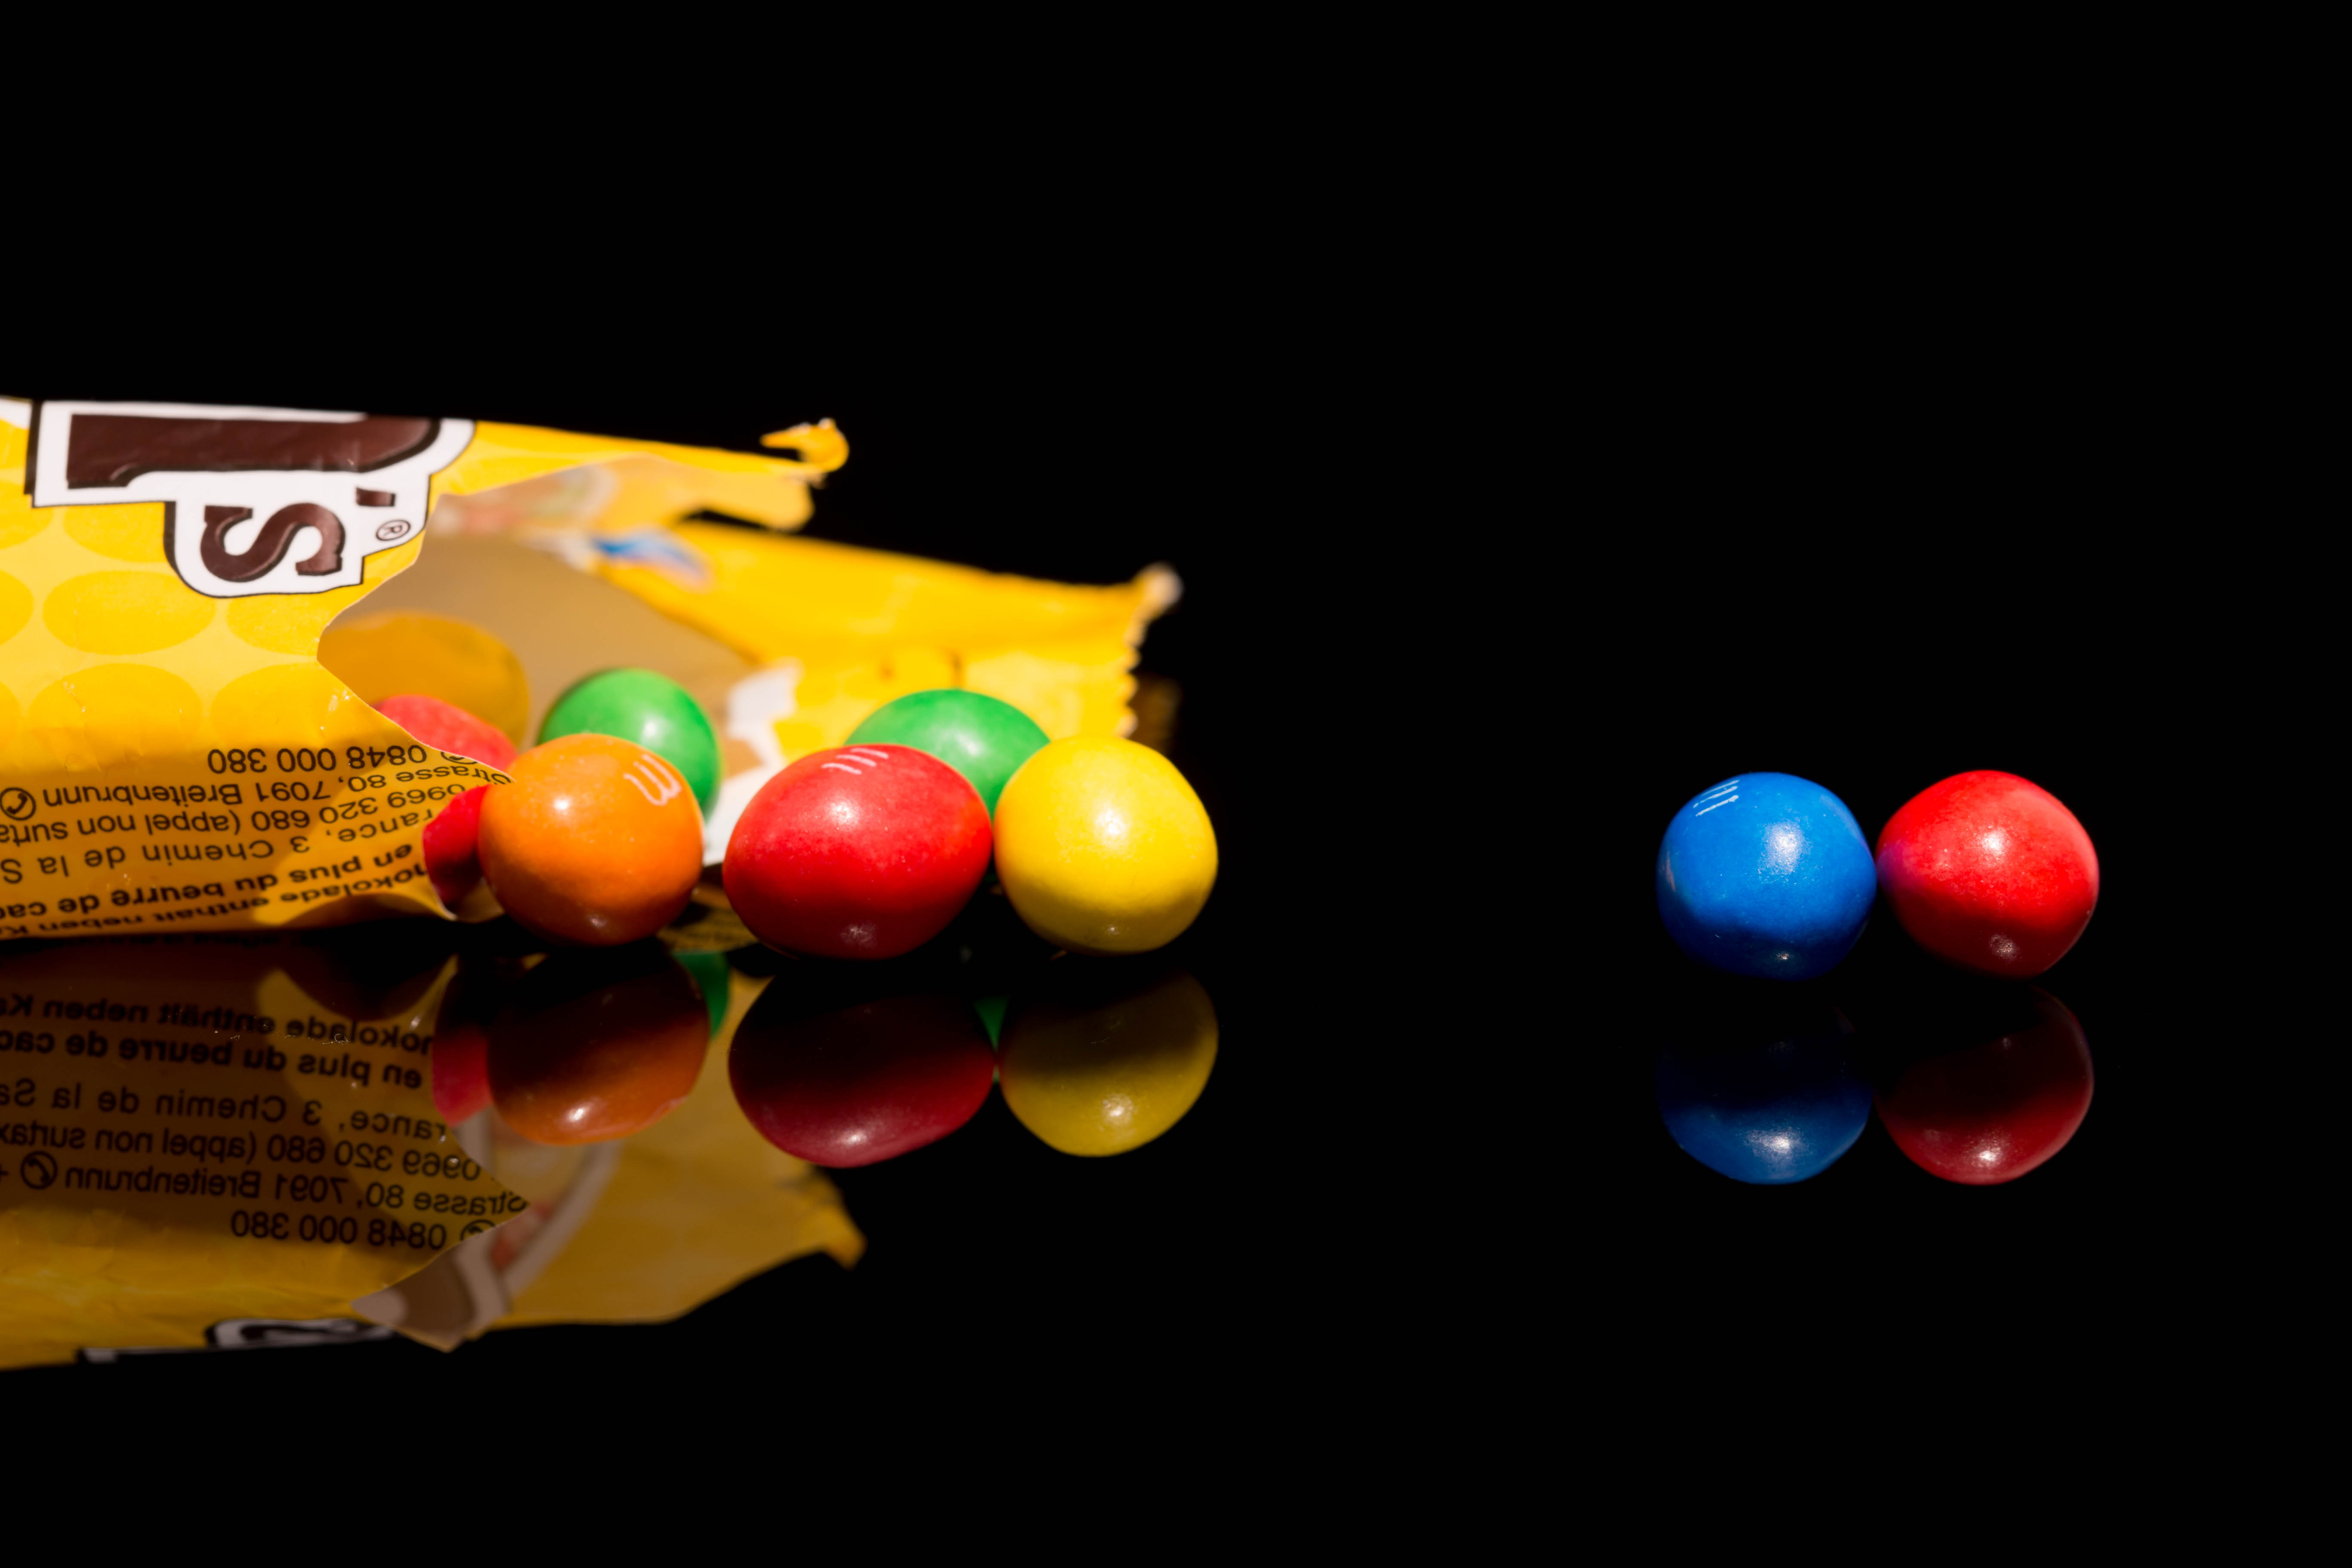 products, m&m's